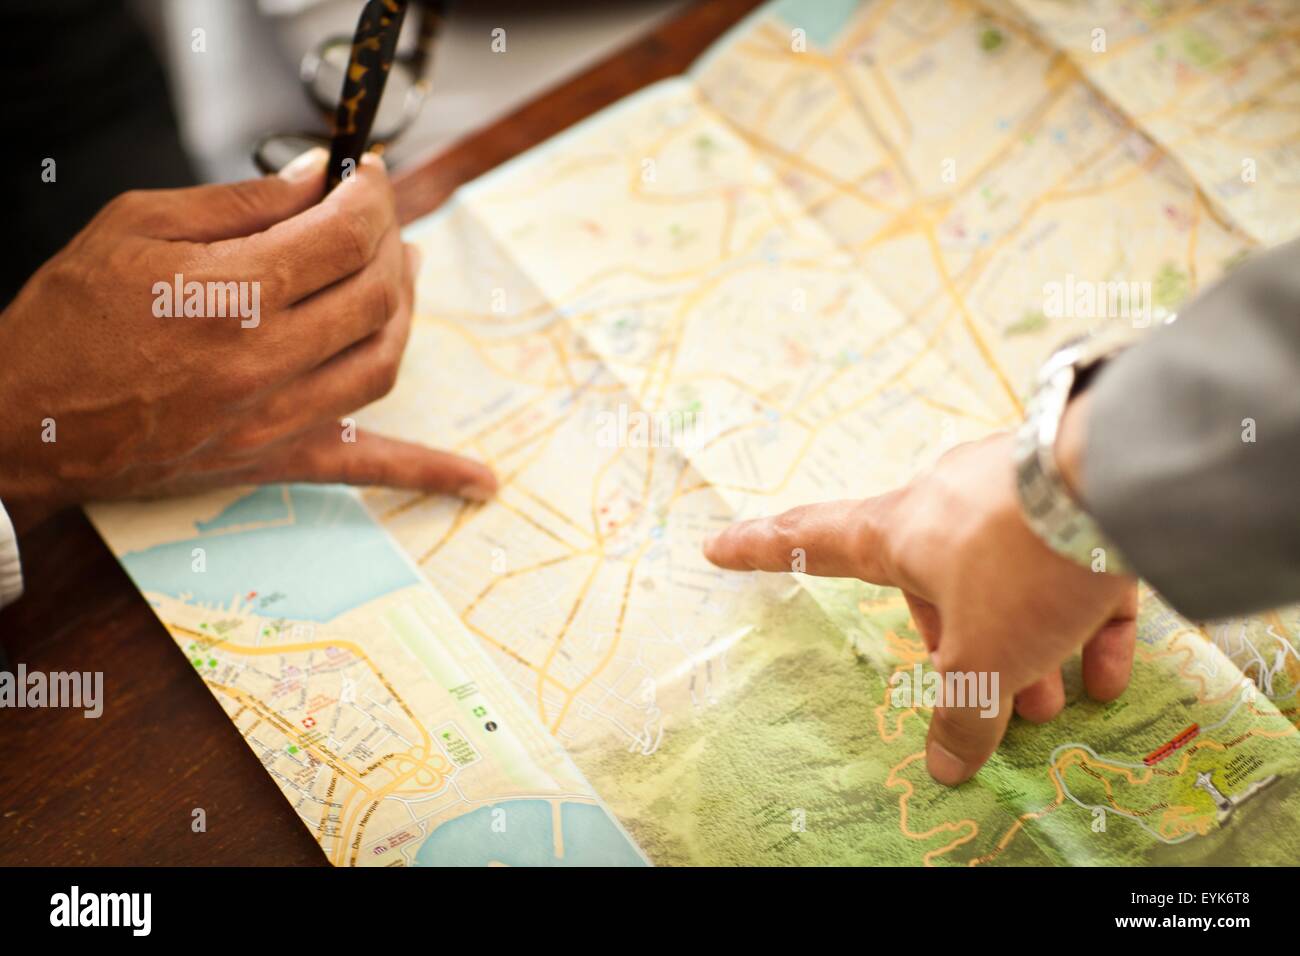 Men map-reading, view of hands Stock Photo